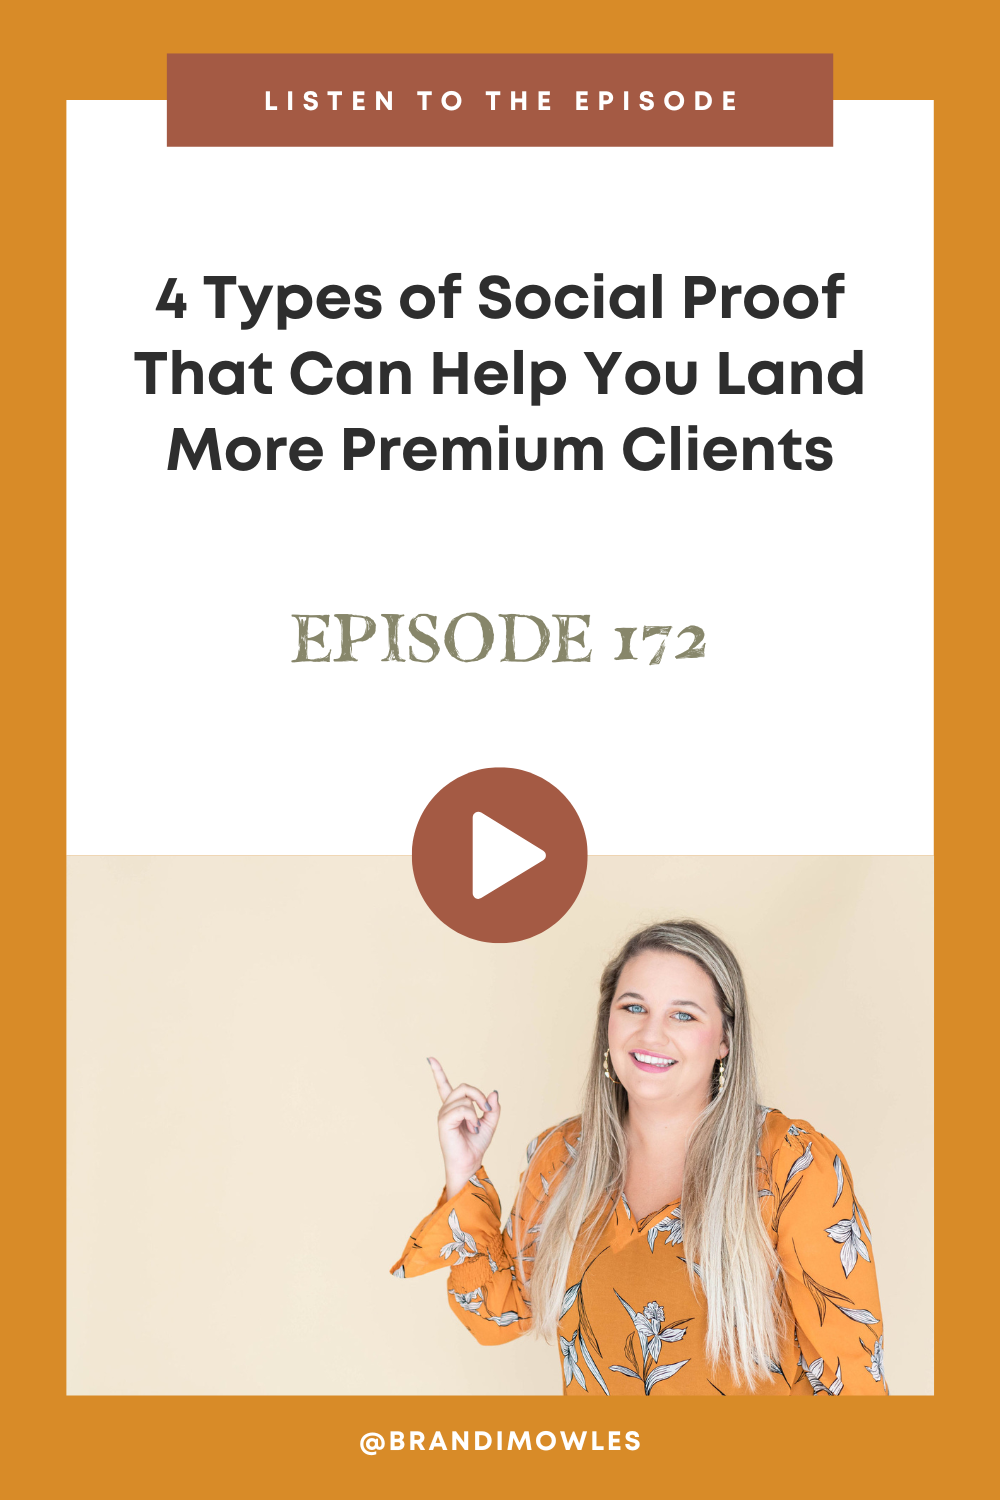 Brandi Mowles podcast episode feature about social proof